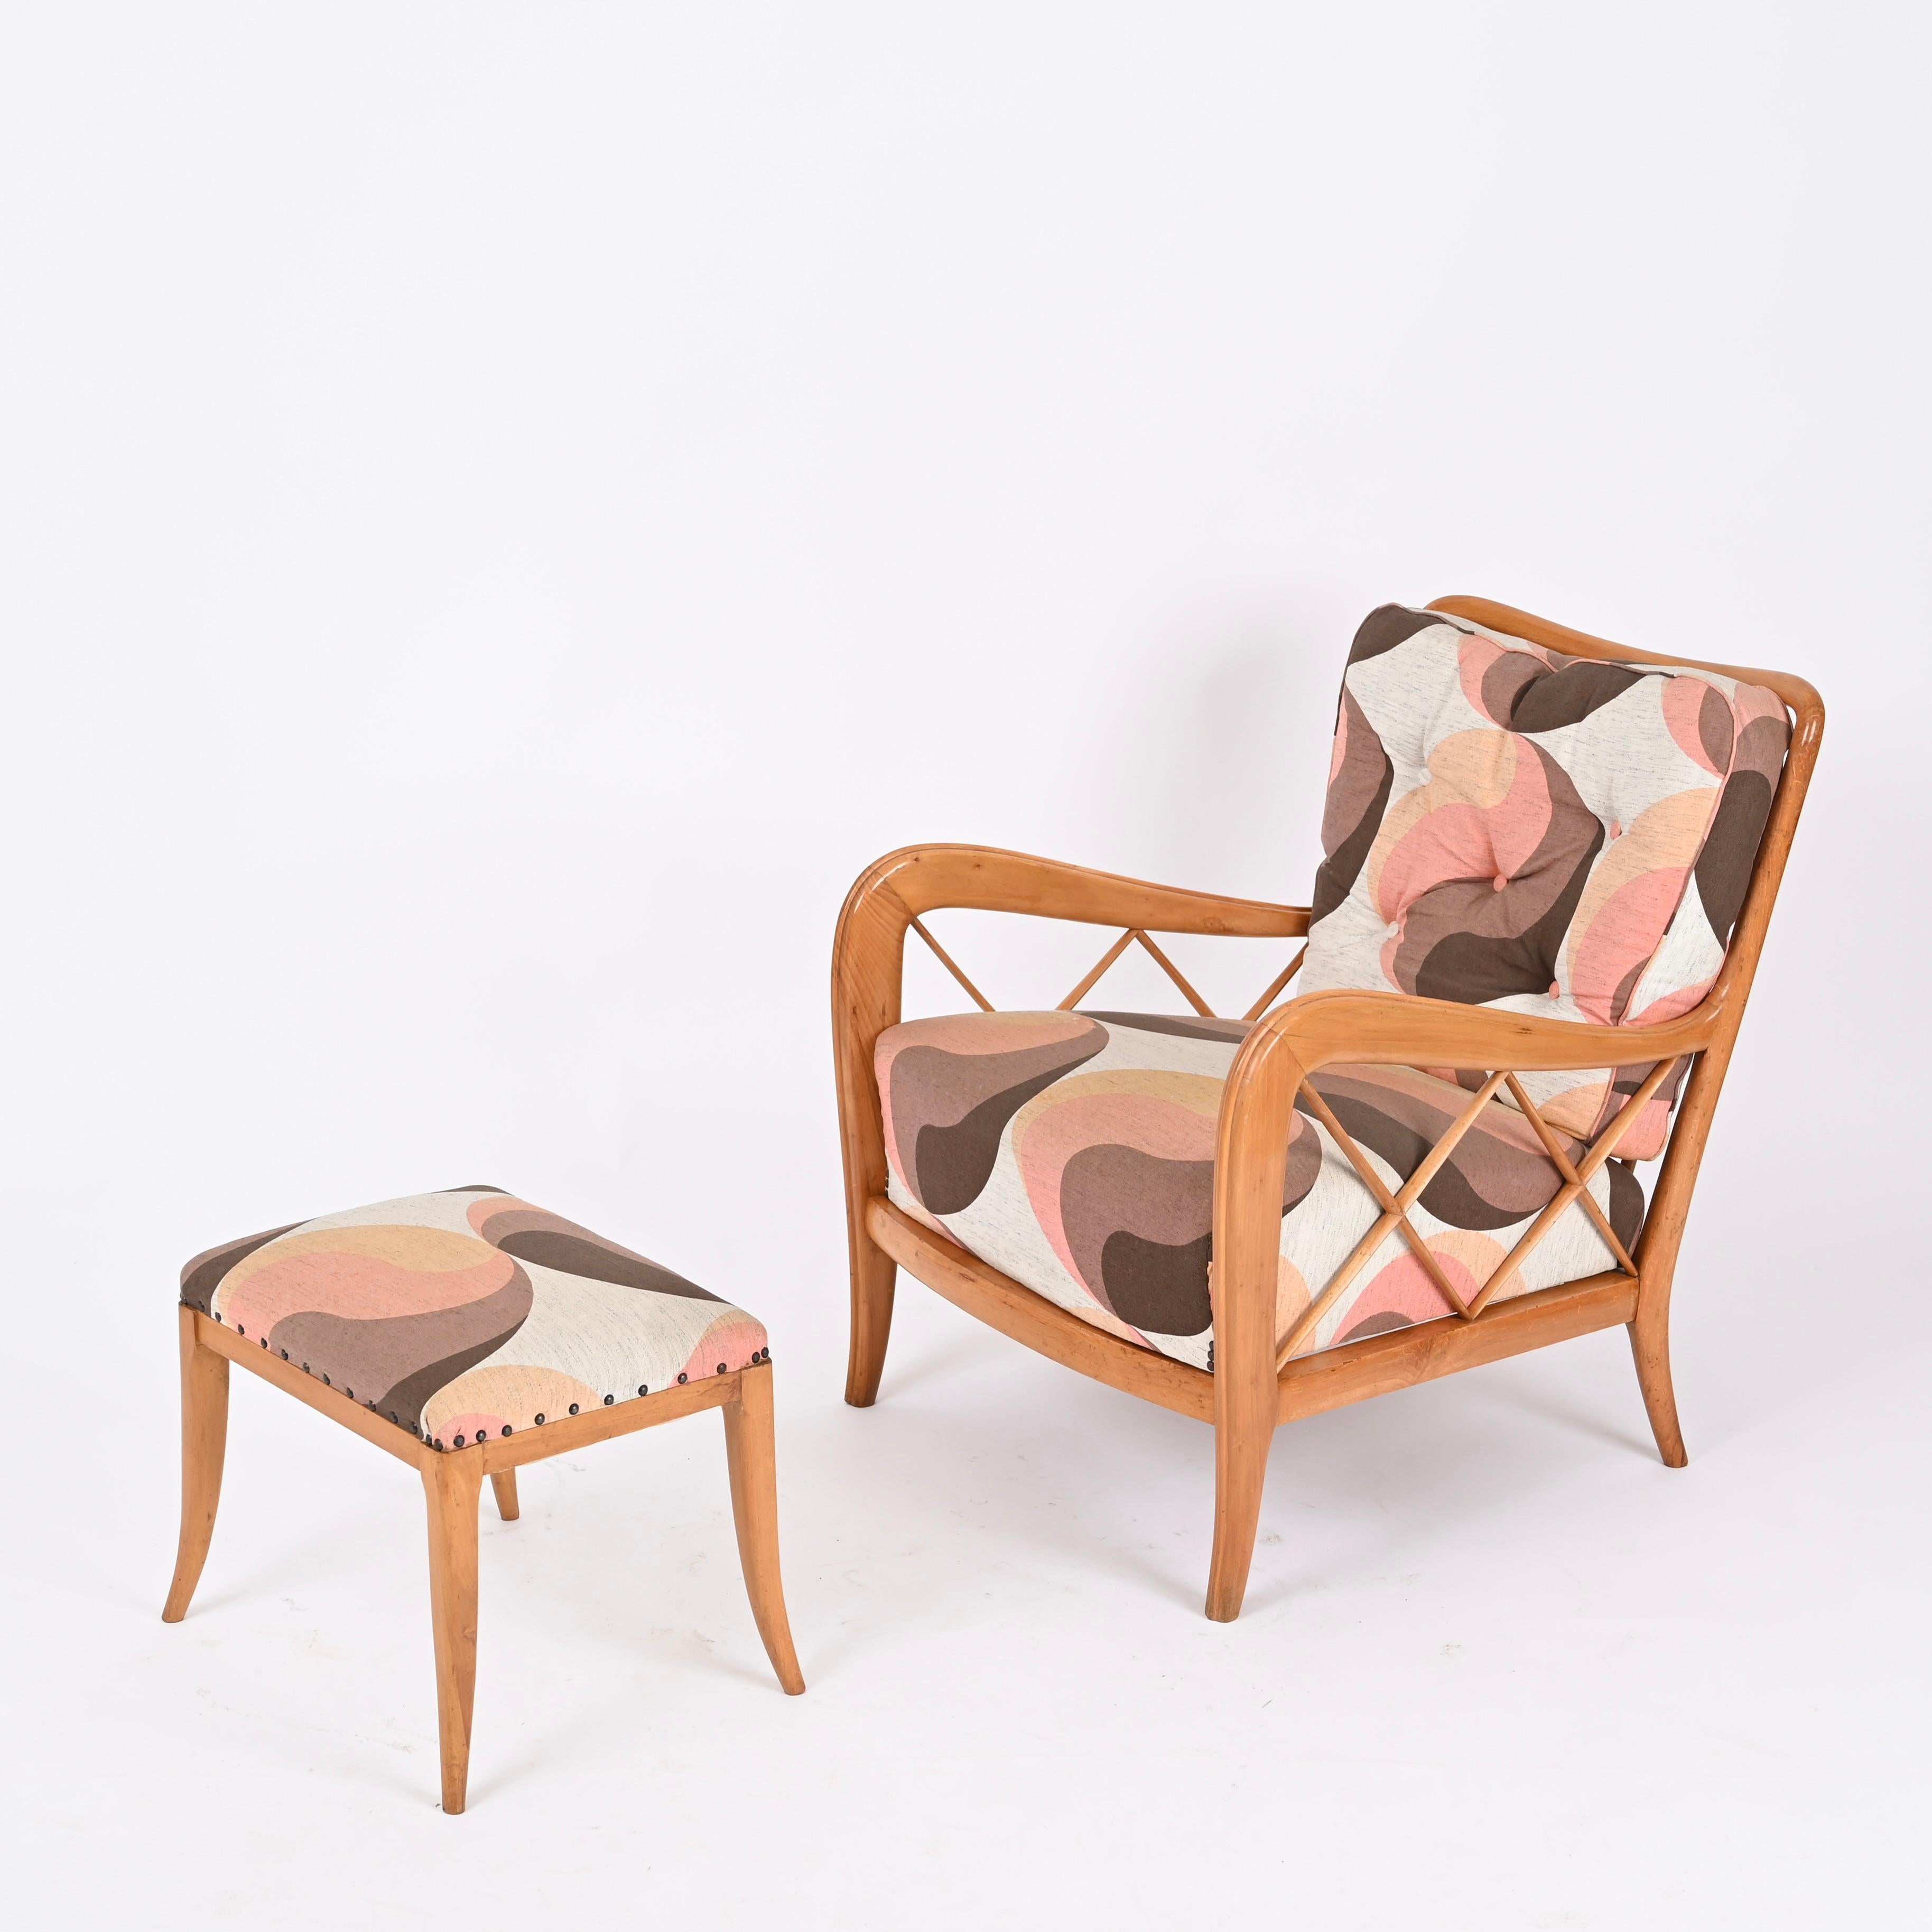 Gorgeous Mid-Century armchair / lounge chair with ottoman fully made in beechwood. This iconic piece was designed by Paolo Buffa and produced by Brugnoli Cantù in Italy during the 1950s.

This wonderful sculptural set is made in a charming light